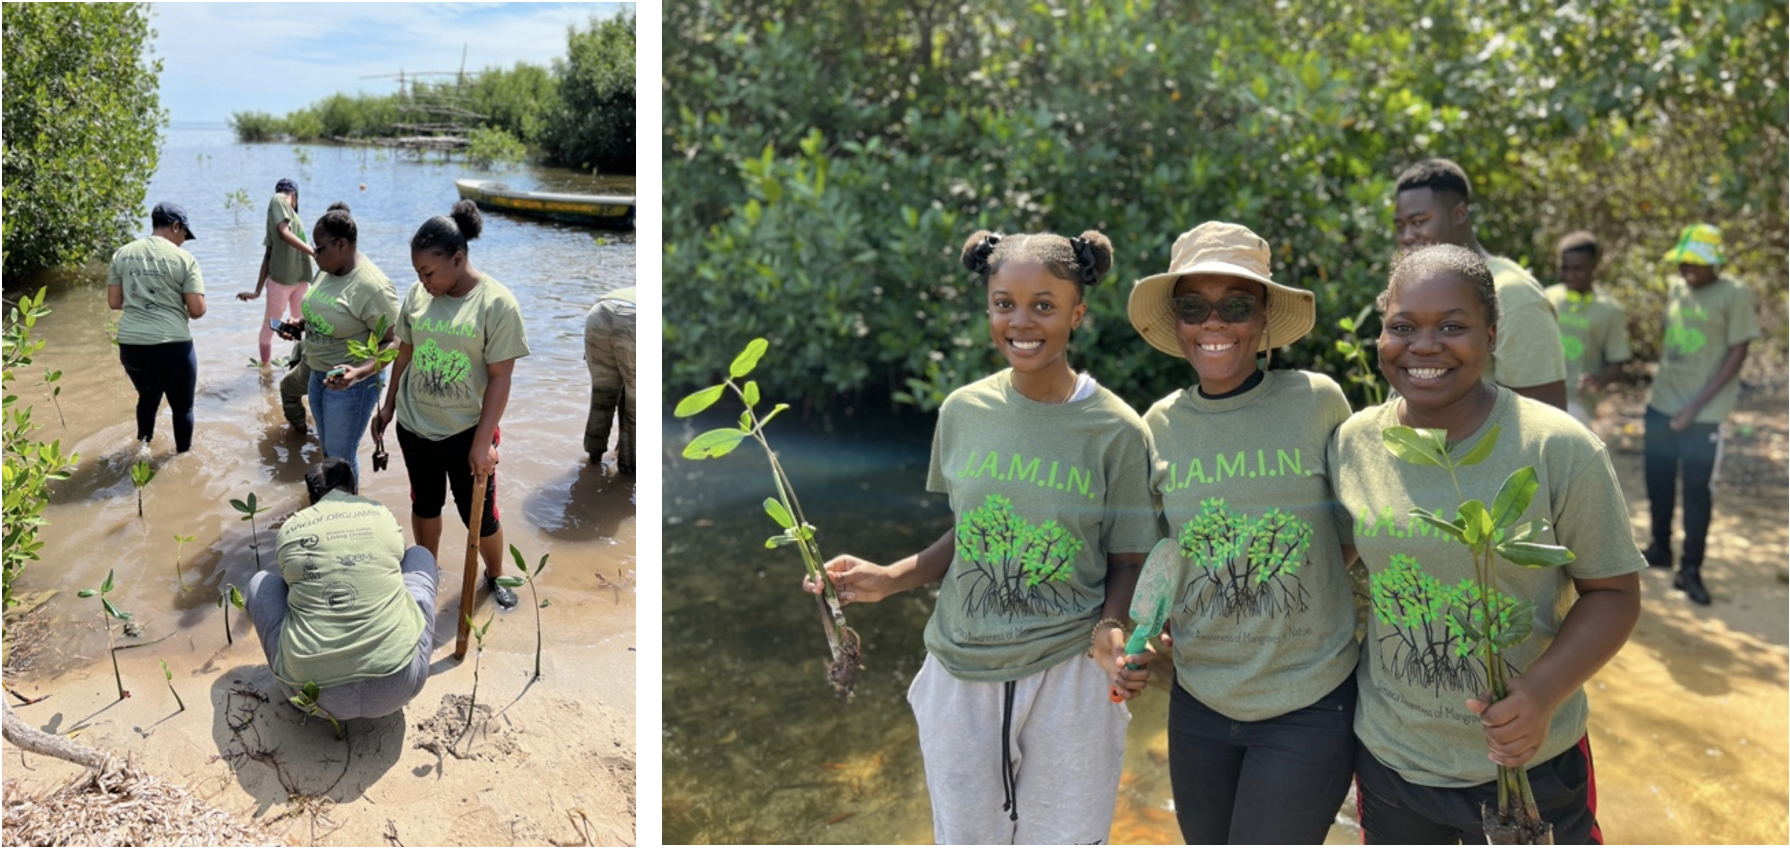 Photo: J.A.M.I.N. students exude boundless enthusiasm as they carefully plant their mangrove propagules within the thriving mangrove forest situated near William Knibb Memorial High School.